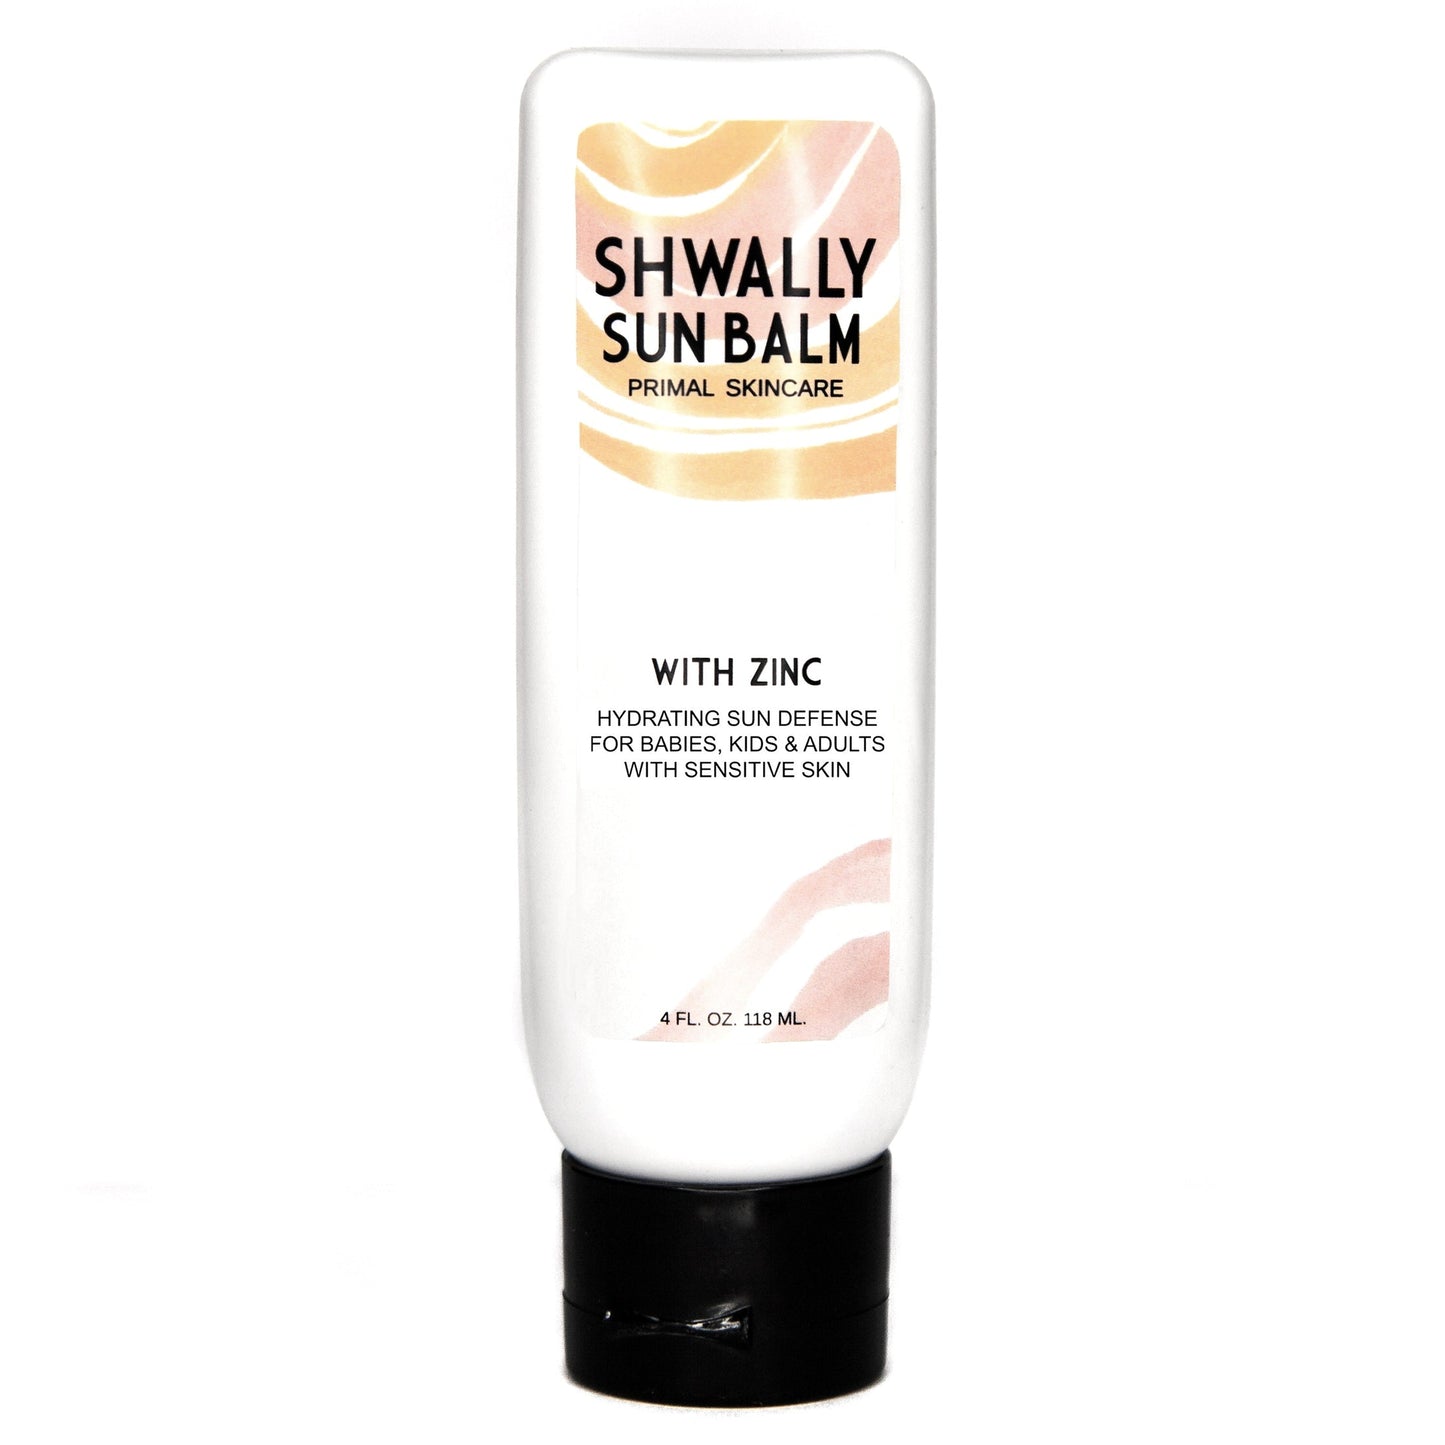 Shwally Zinc & Avocado Mineral SunBalm by Shwally - For Home and Play